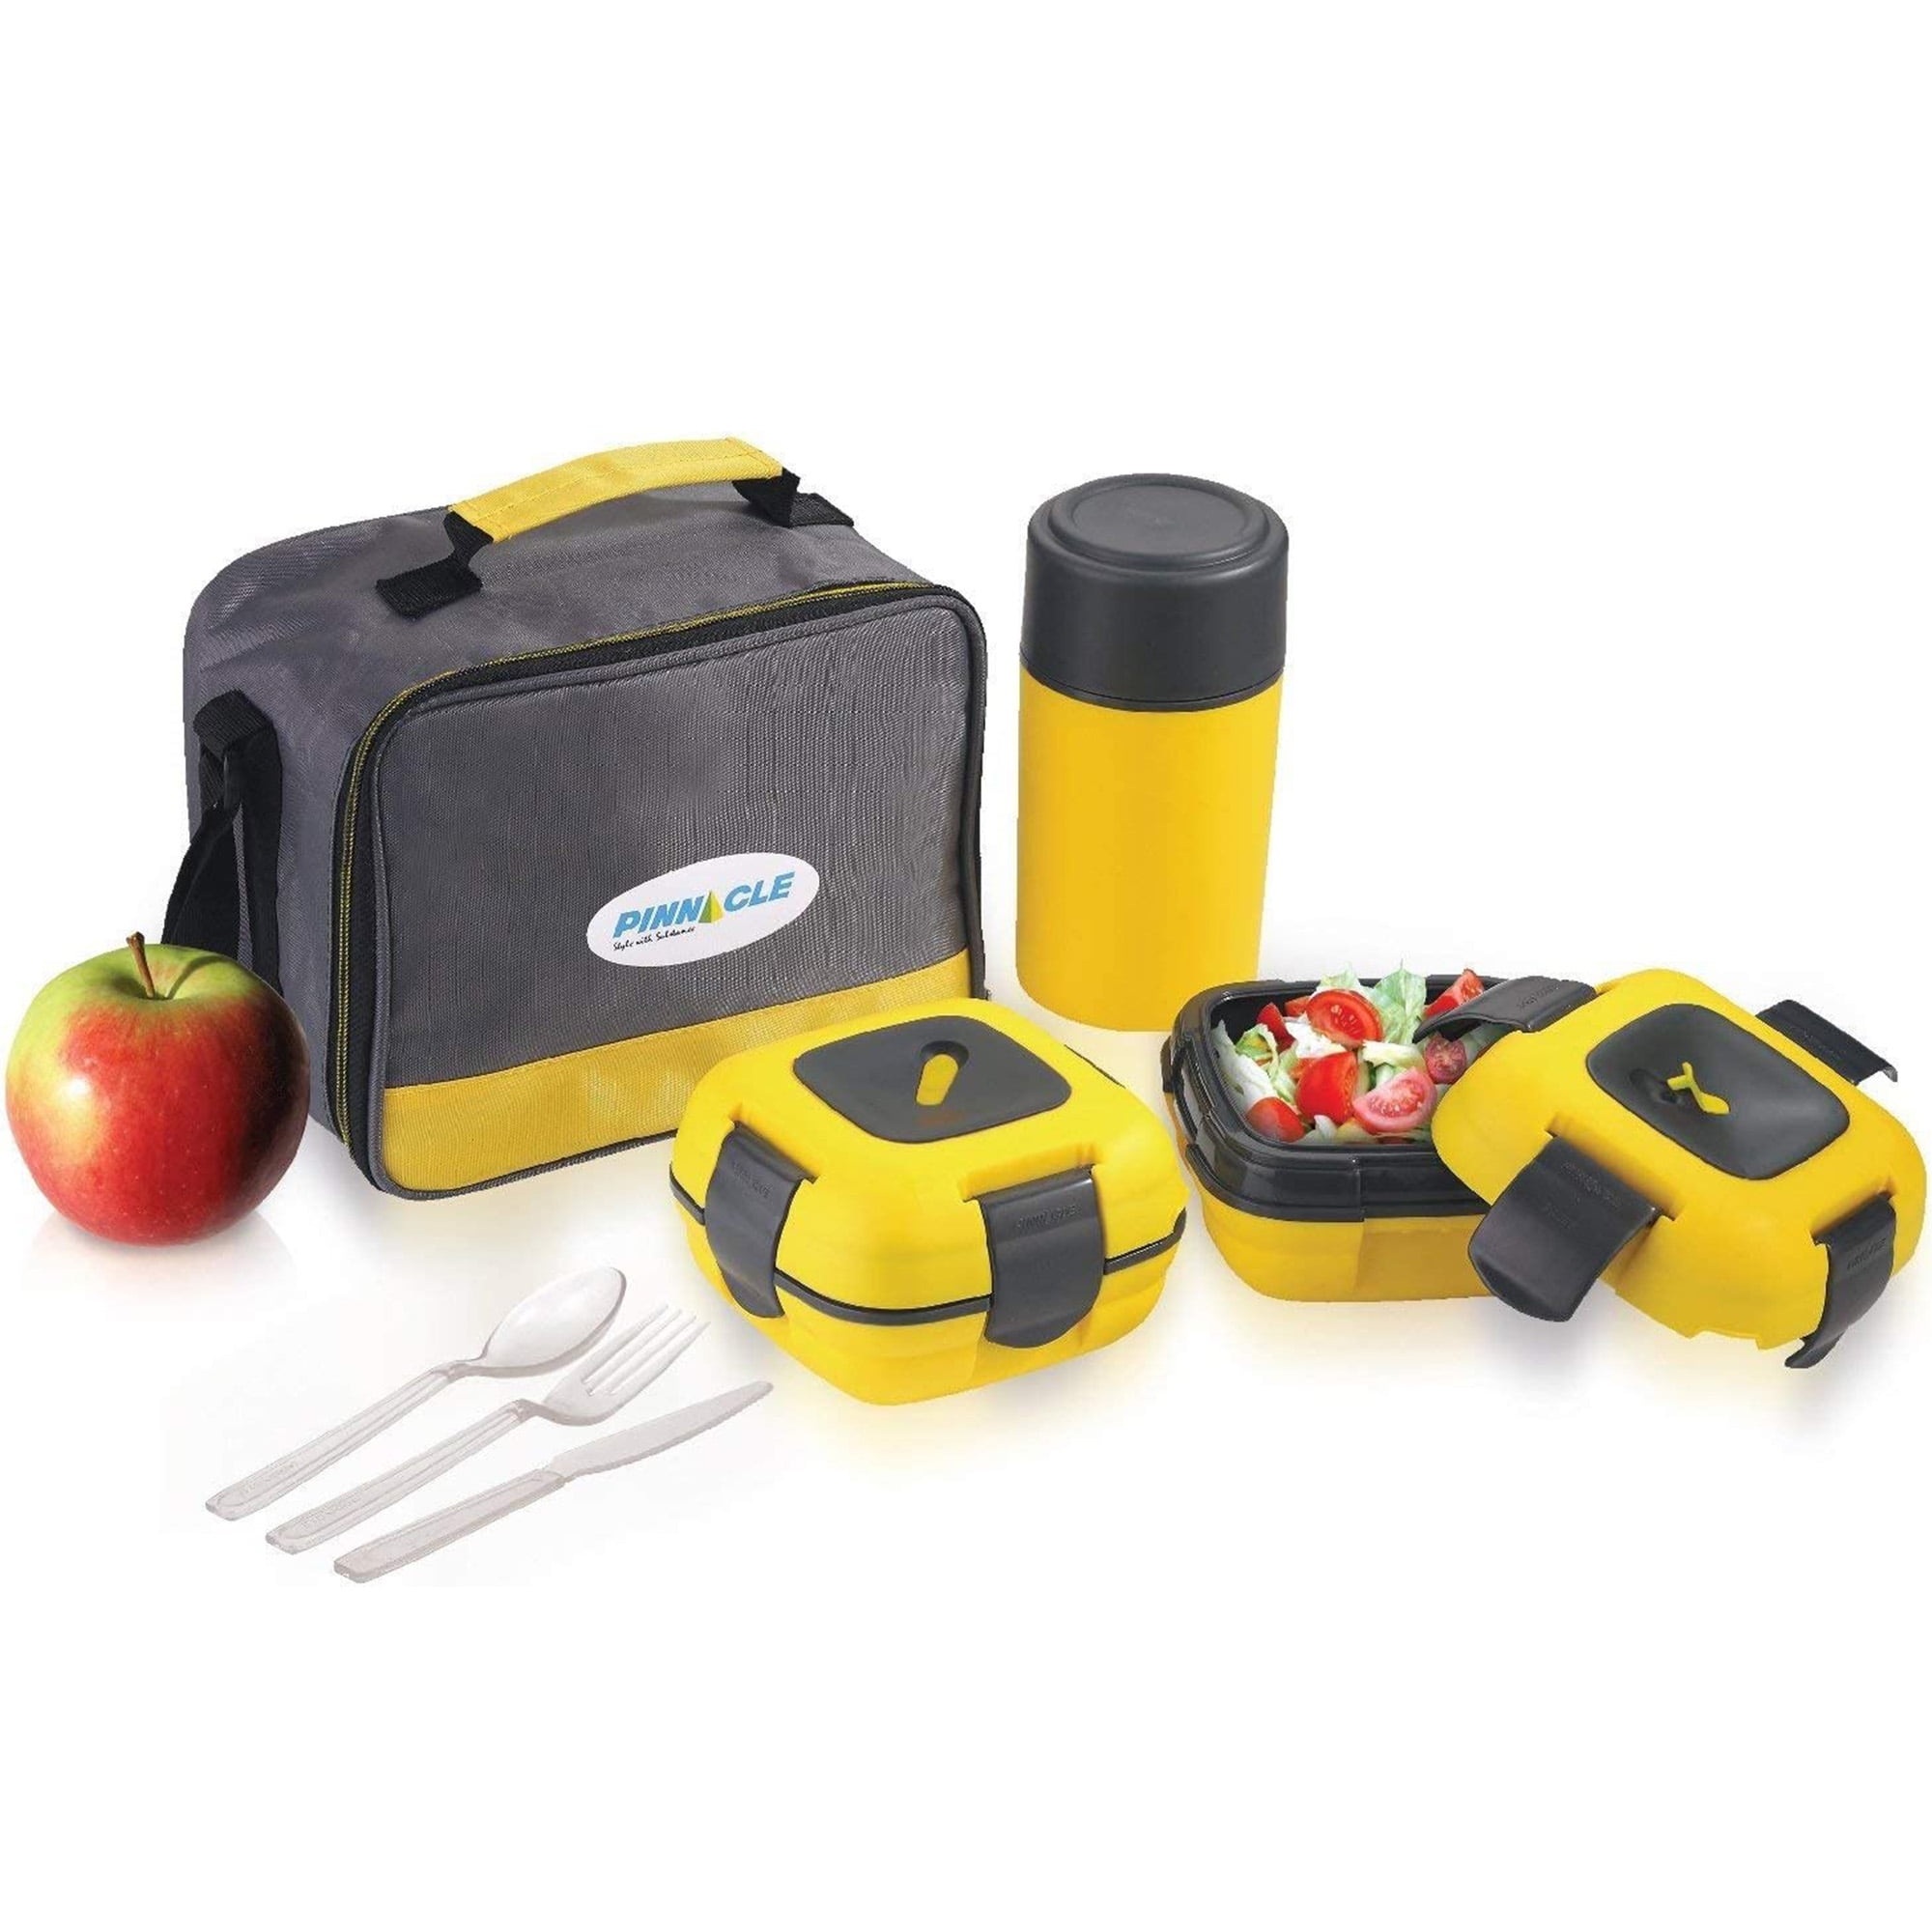 Thermal Tower Lunch Box — Buy online at